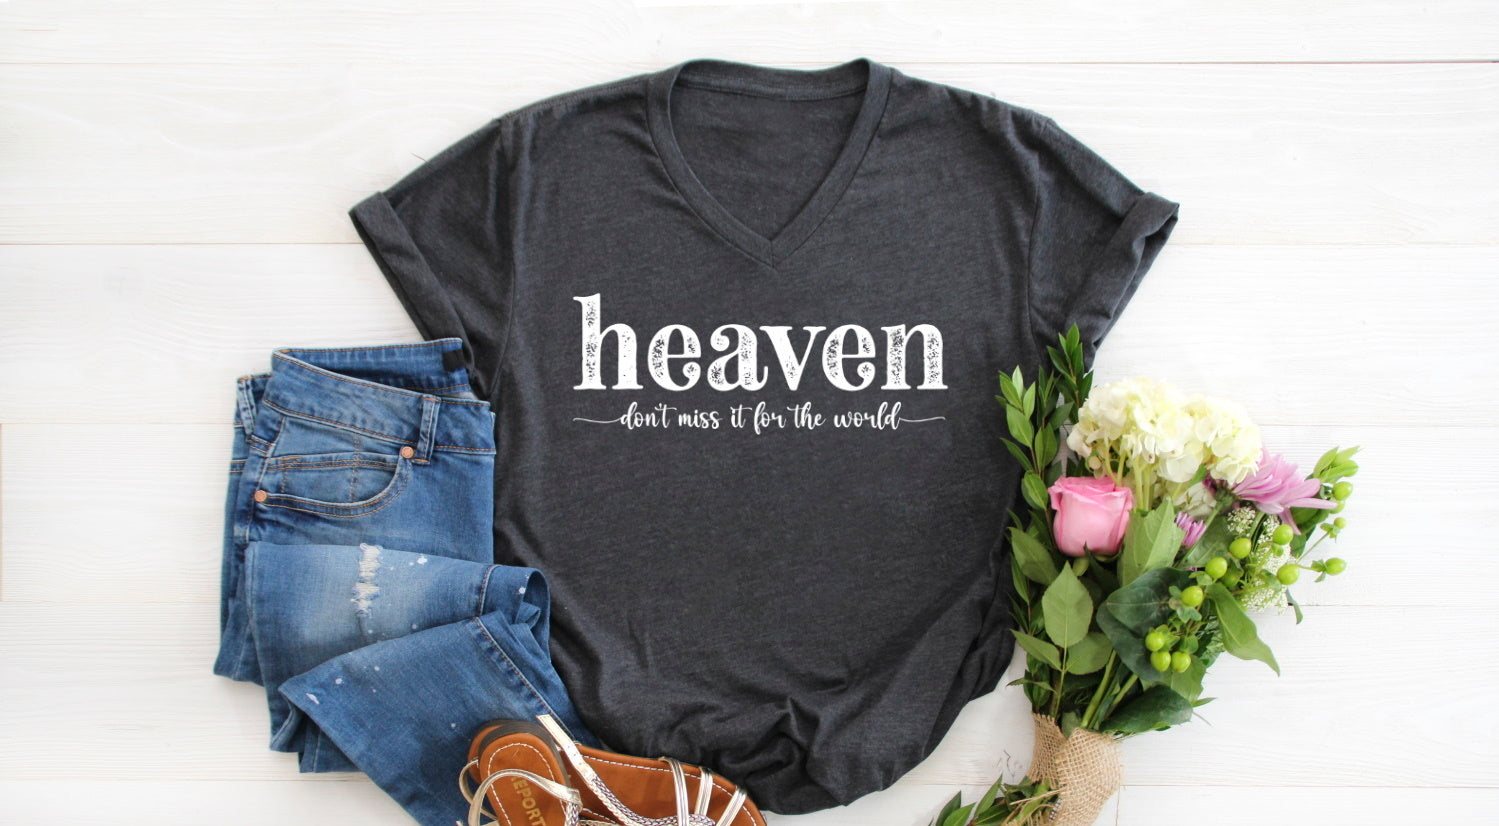 Heaven Don't Miss It For The World T-shirt